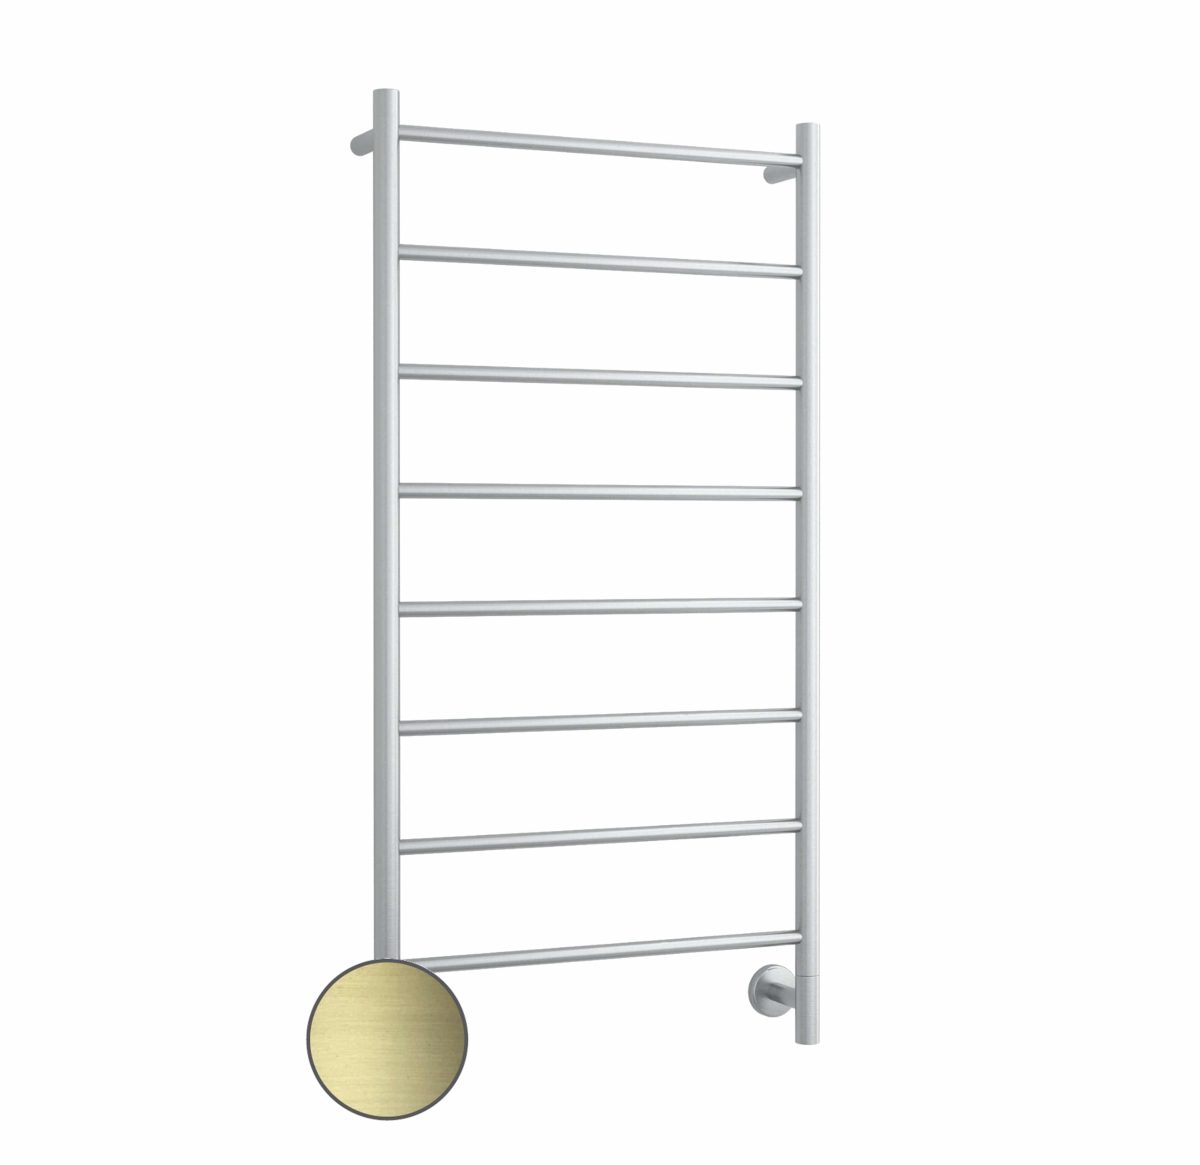 THERMOGROUP S62SBB ROUND LADDER HEATED TOWEL RAIL BRUSHED BRASS